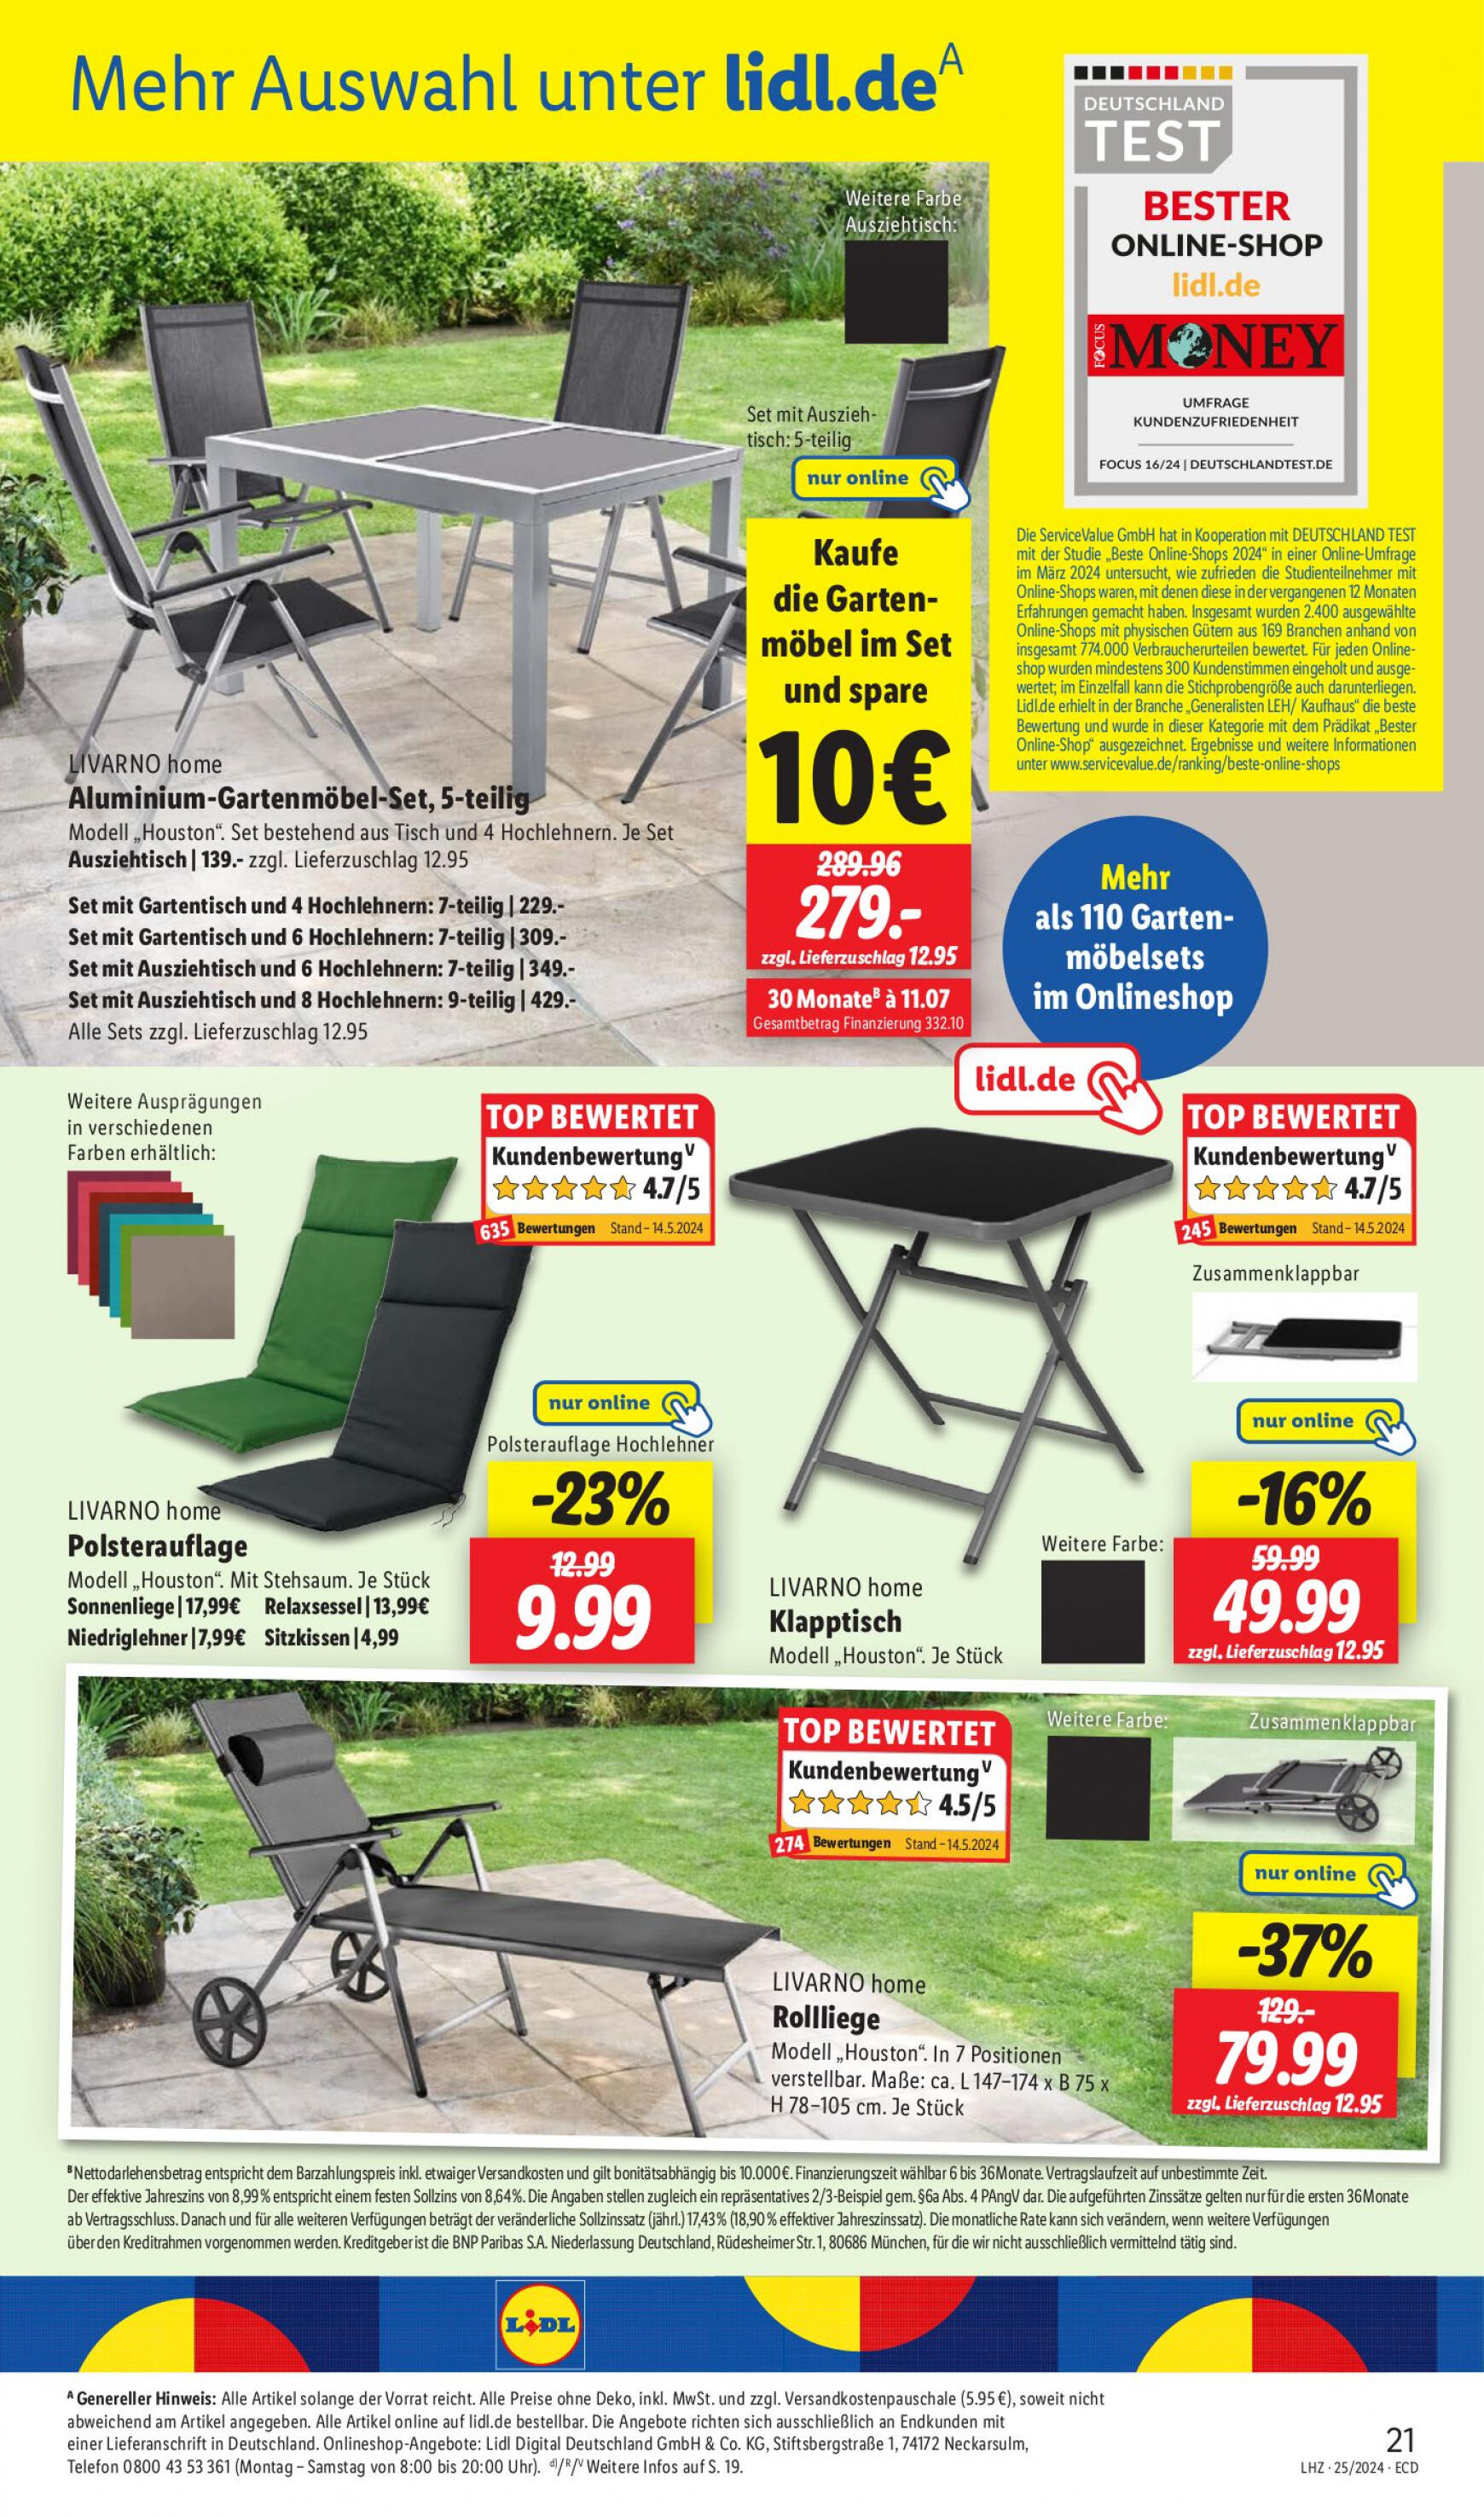 lidl - Flyer Lidl aktuell 17.06. - 22.06. - page: 25